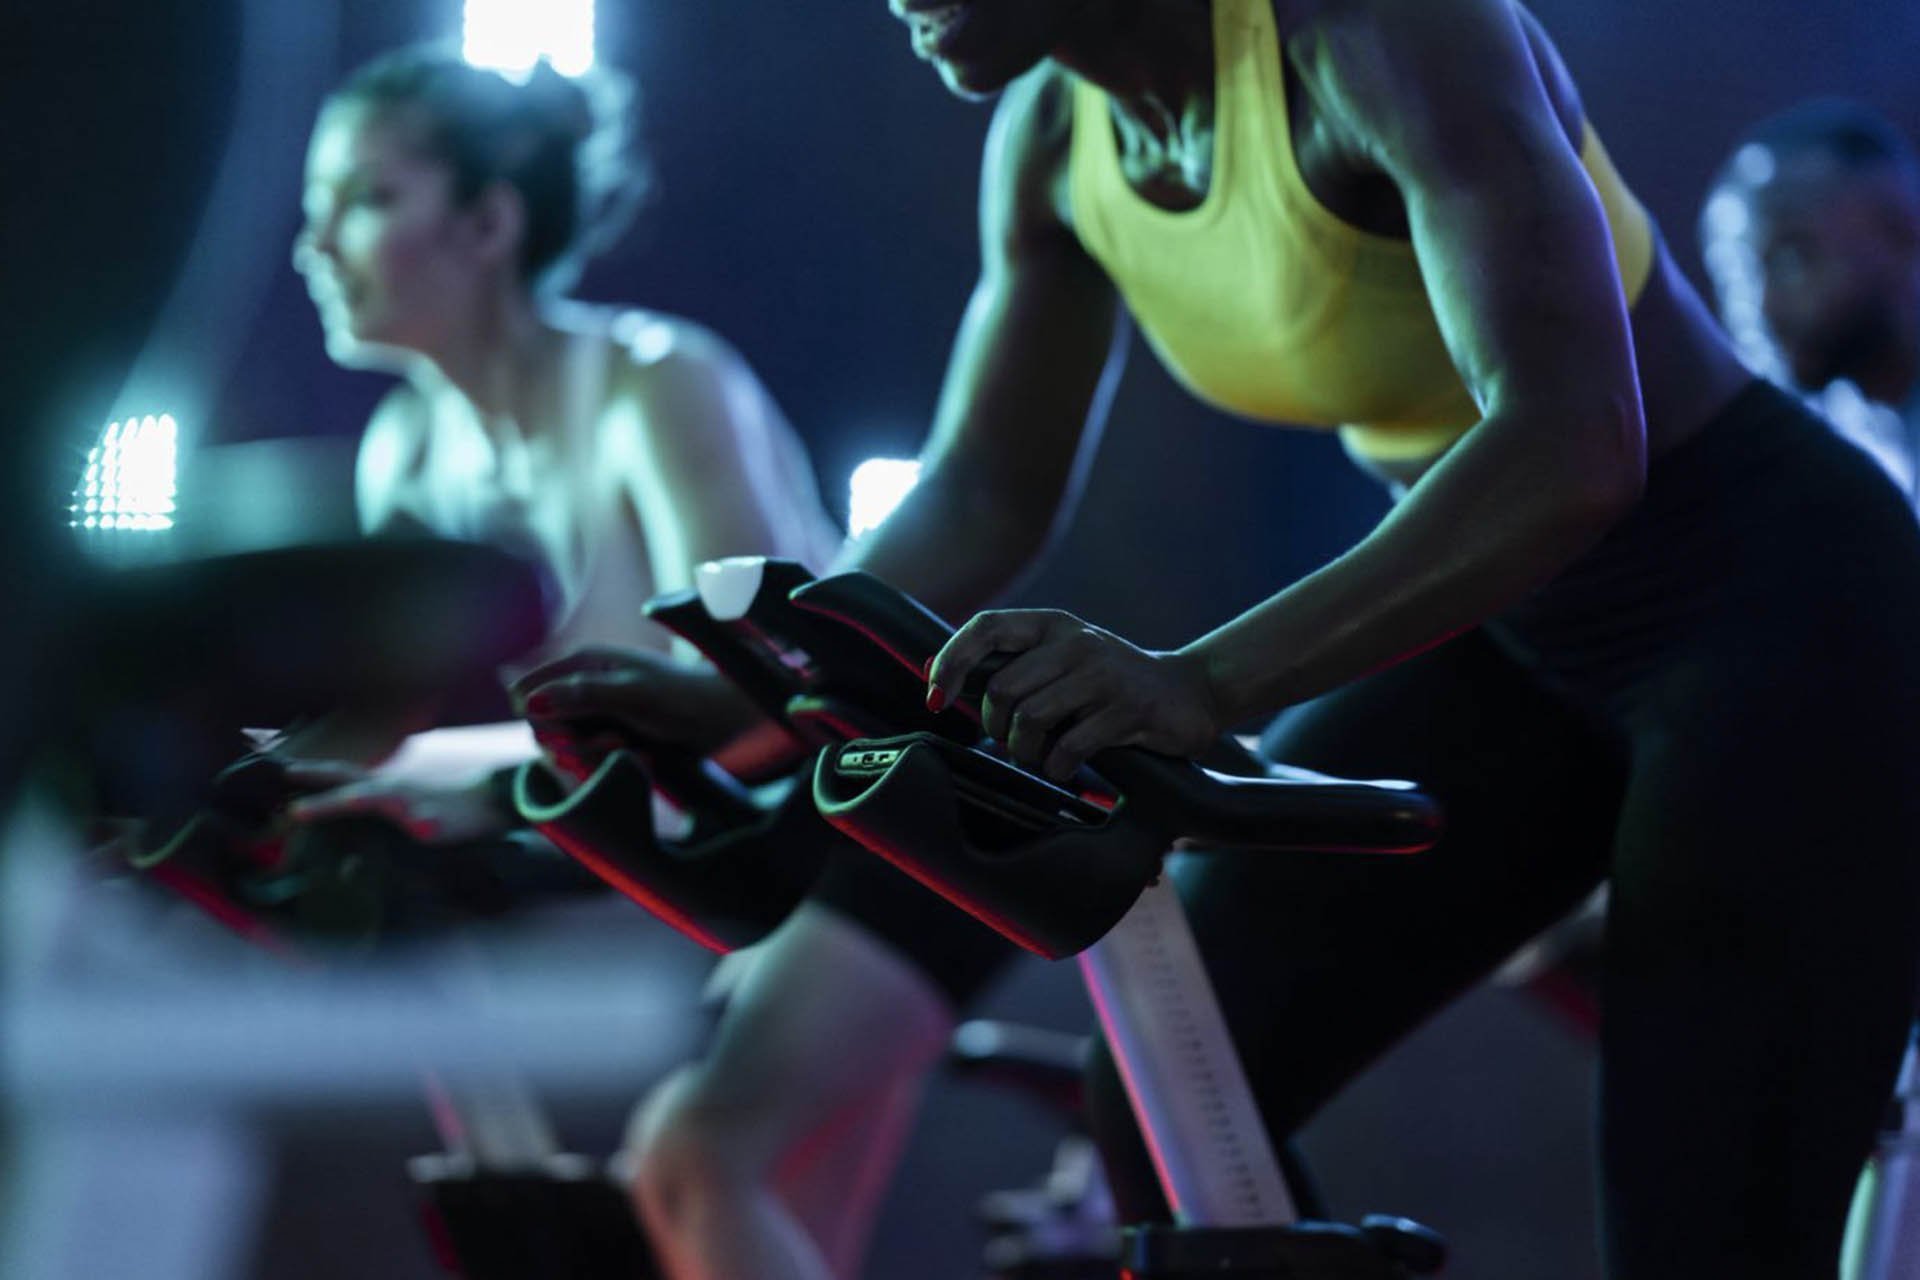 Spin-Class-at-The-Wrightington-Hotel-Heath-club-and-Spa